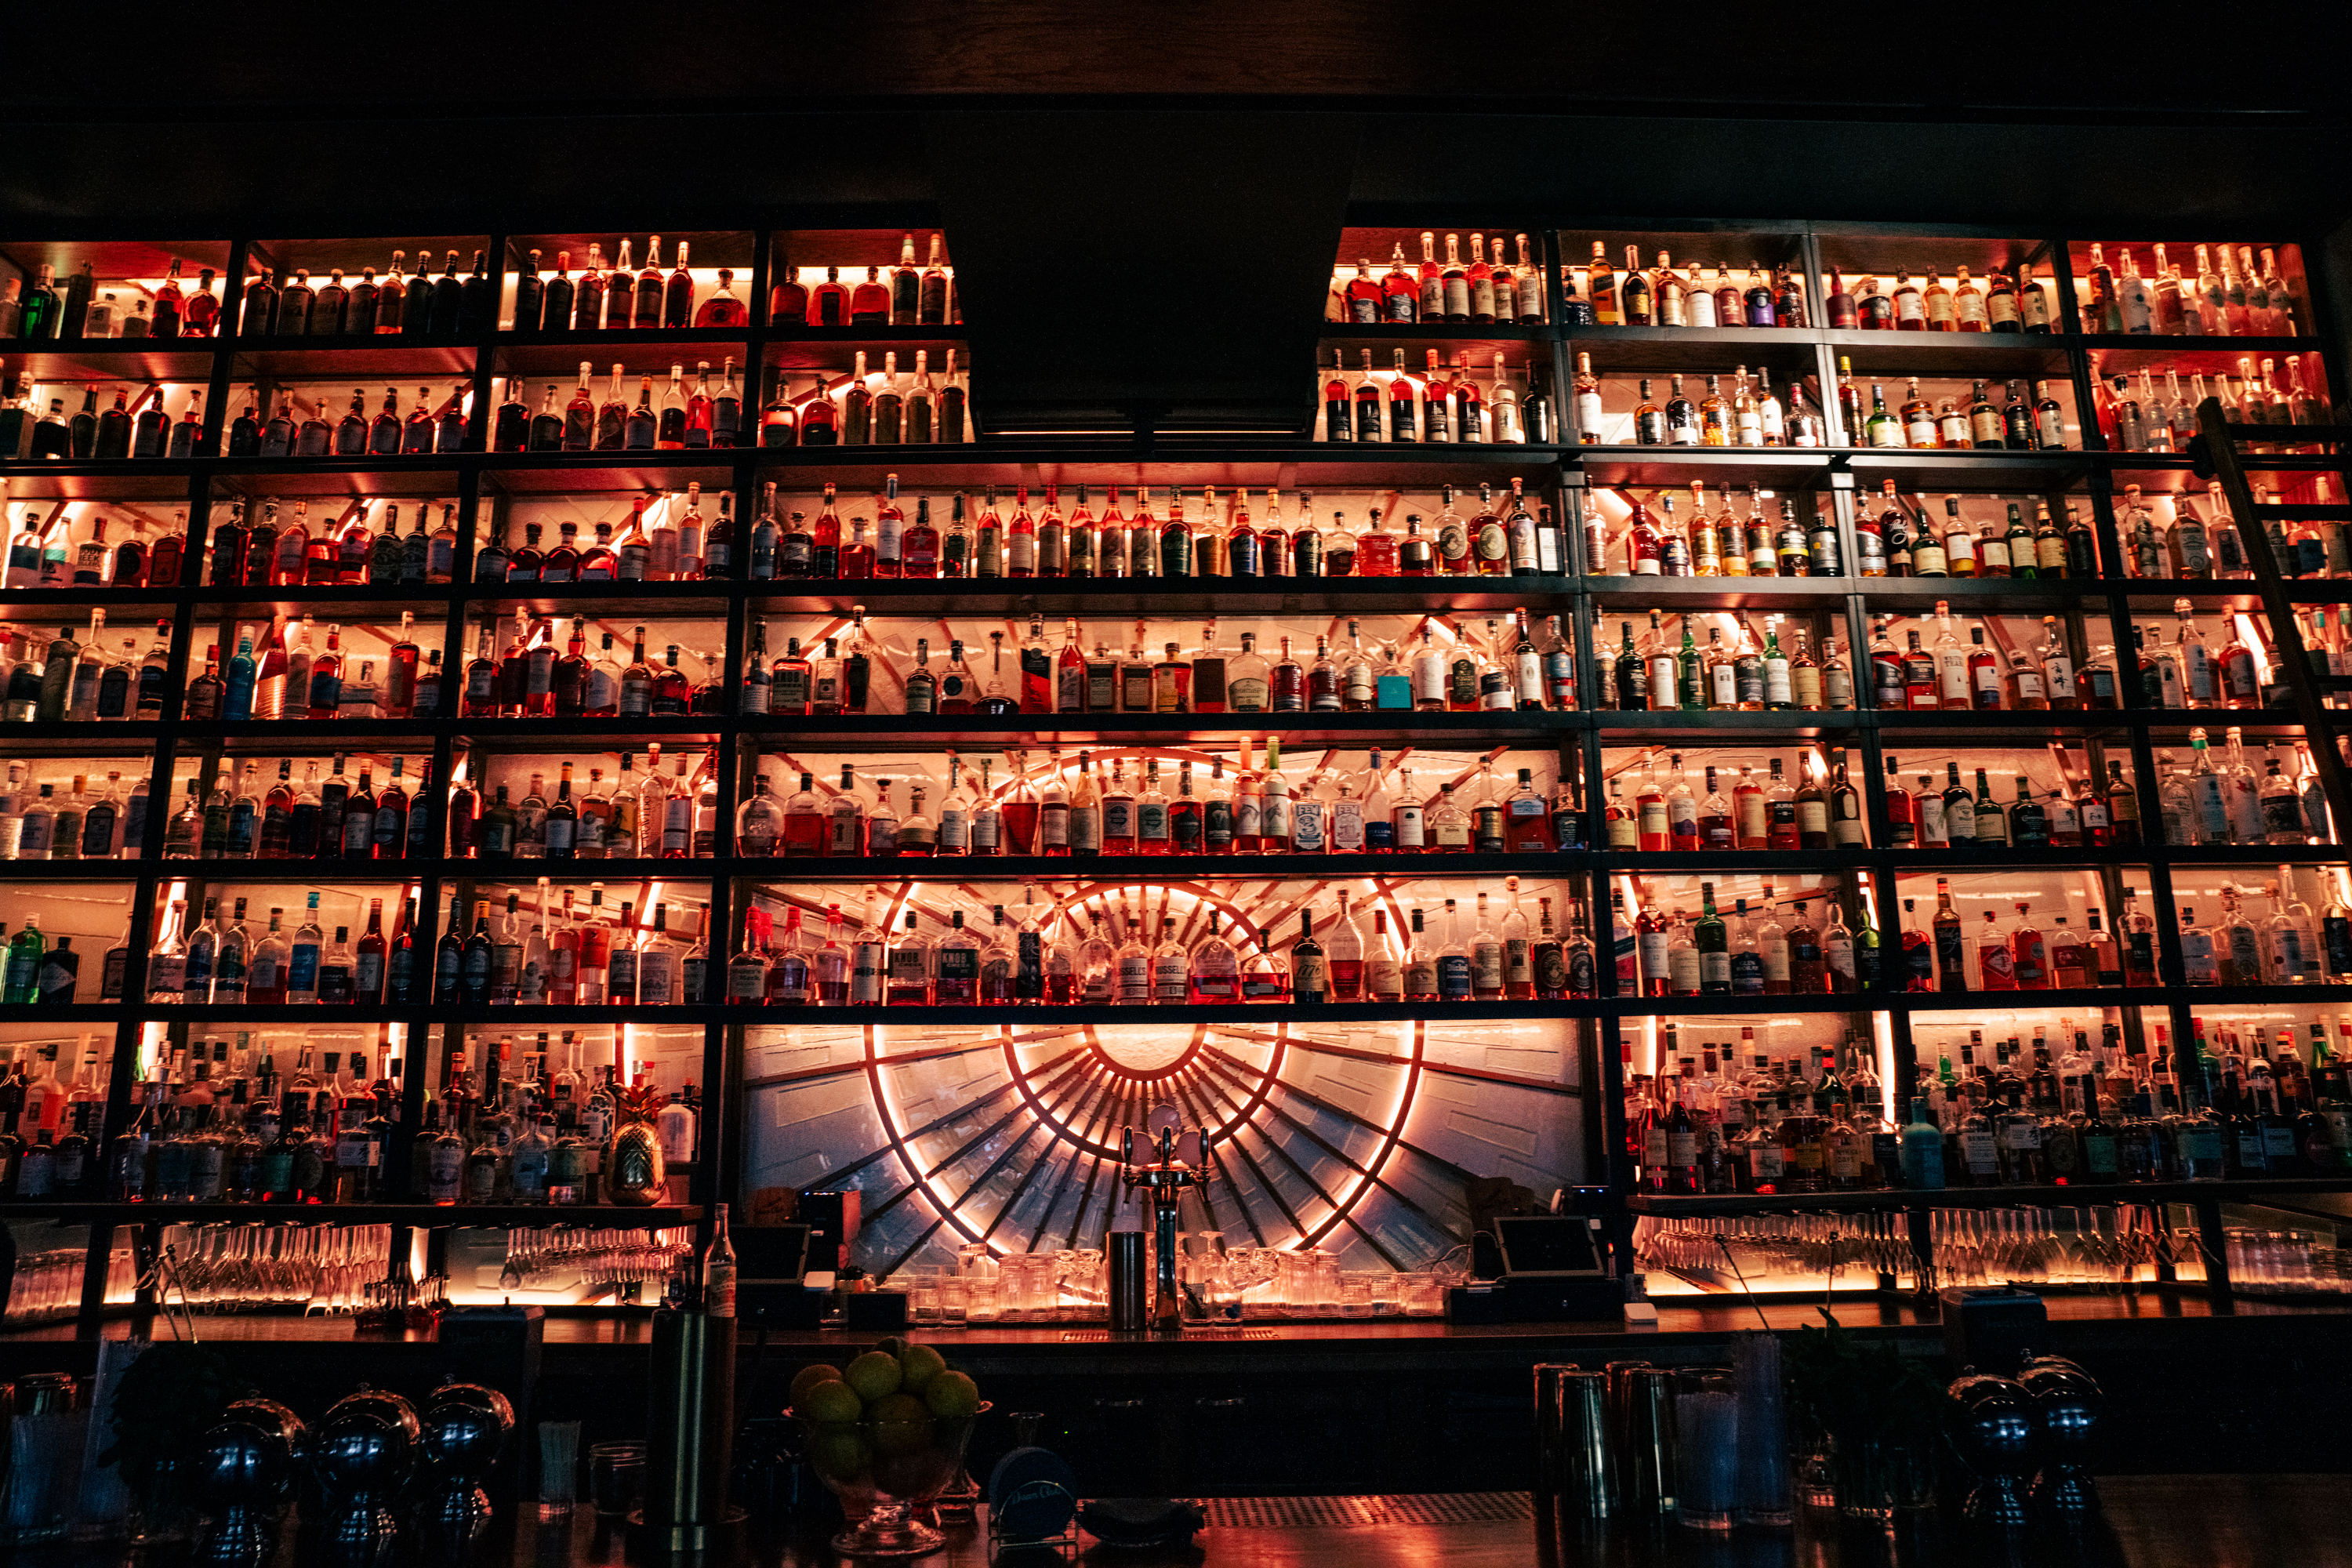 Dawn Club's prodigious selection of alcohol and mixers is seen behind the bar.